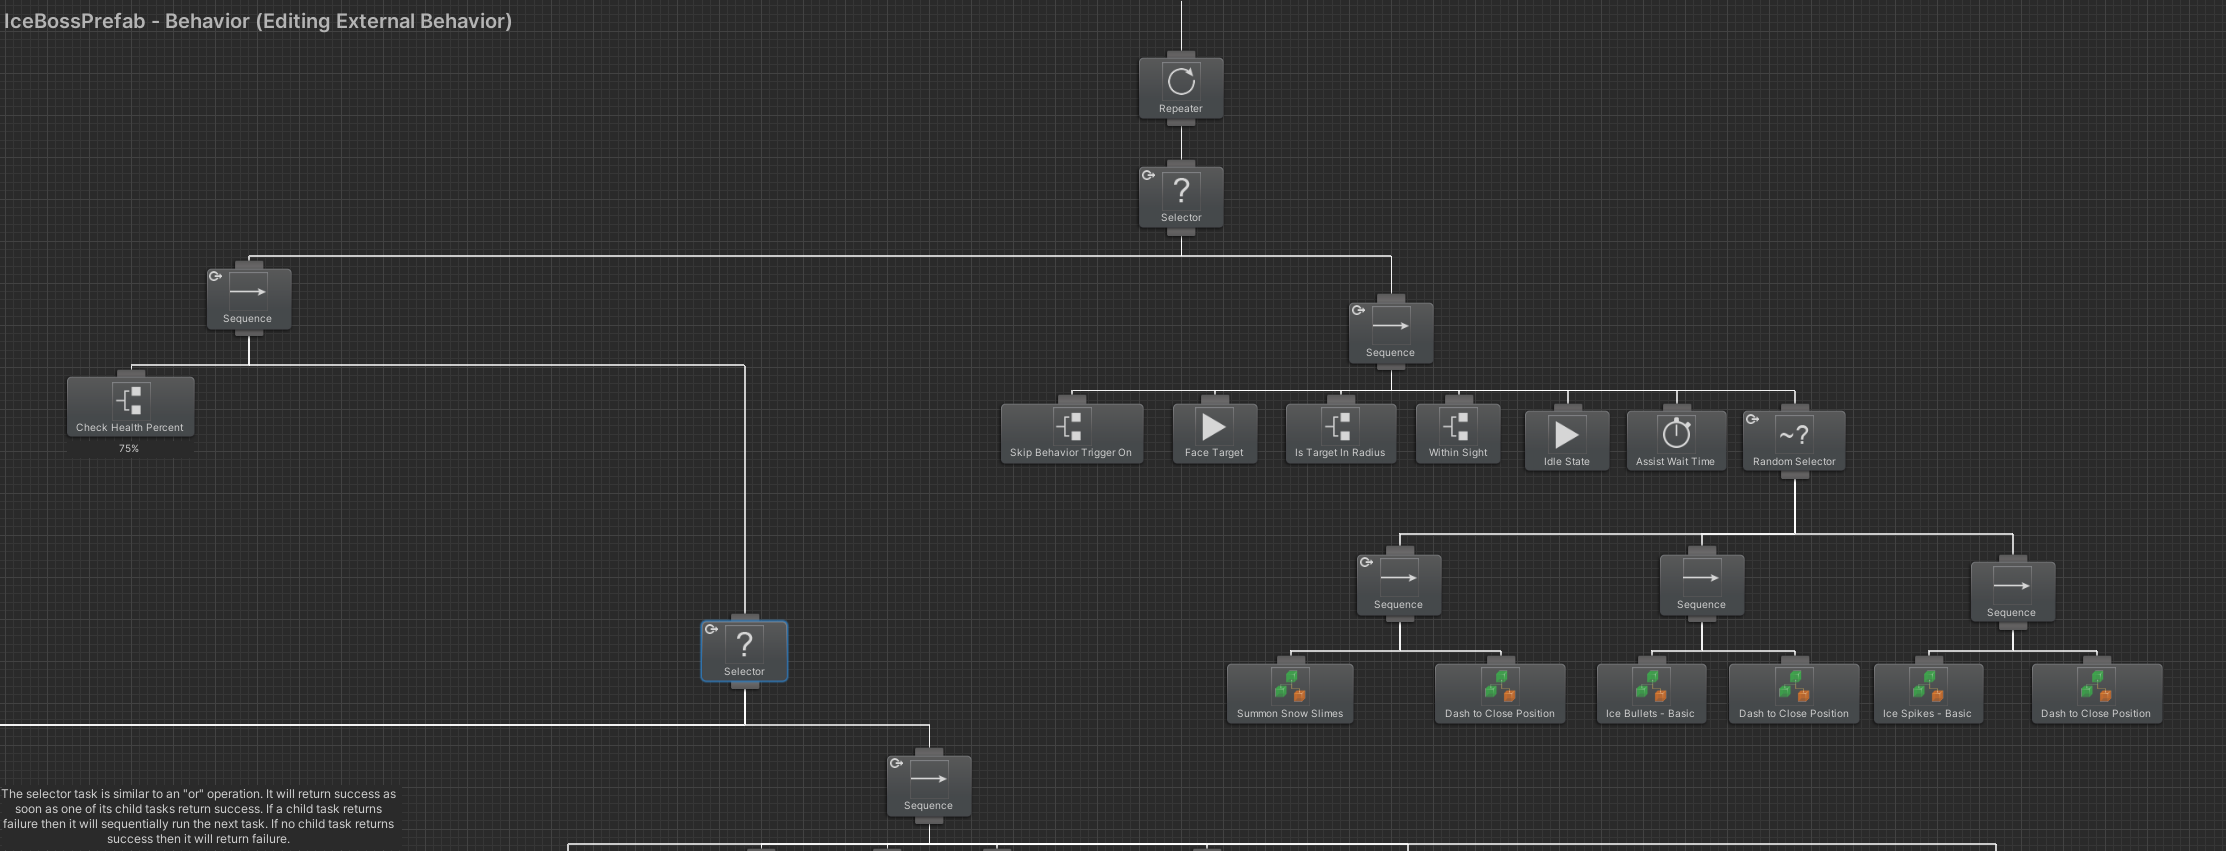 Deeper view of the behavior tree for the character of Hailga in Evil Wizard, showing the behaviors for the boss fight. (Rubber Duck Games)